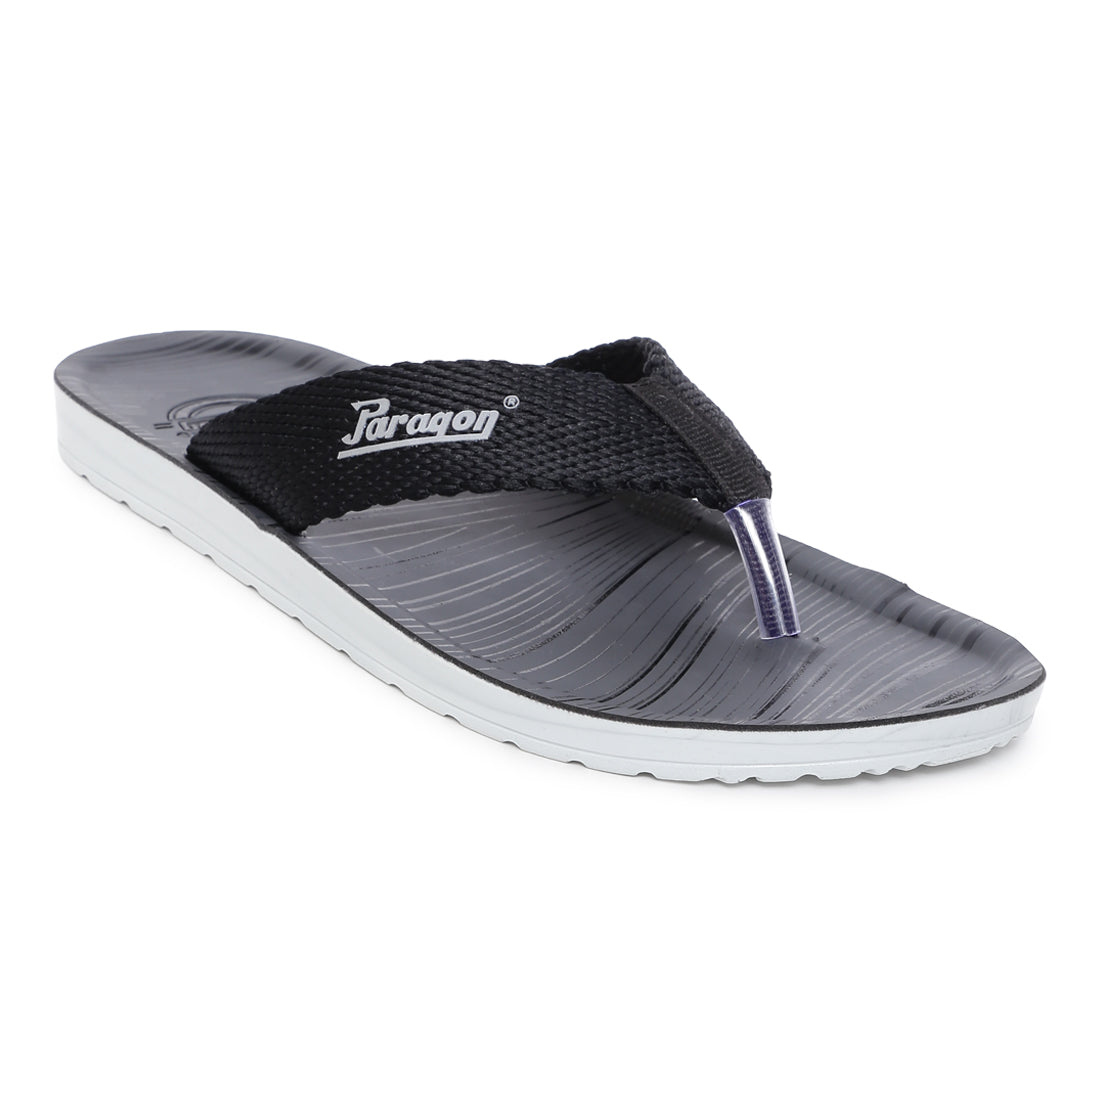 Paragon  PUK2208G Men Stylish Sandals | Comfortable Sandals for Daily Outdoor Use | Casual Formal Sandals with Cushioned Soles